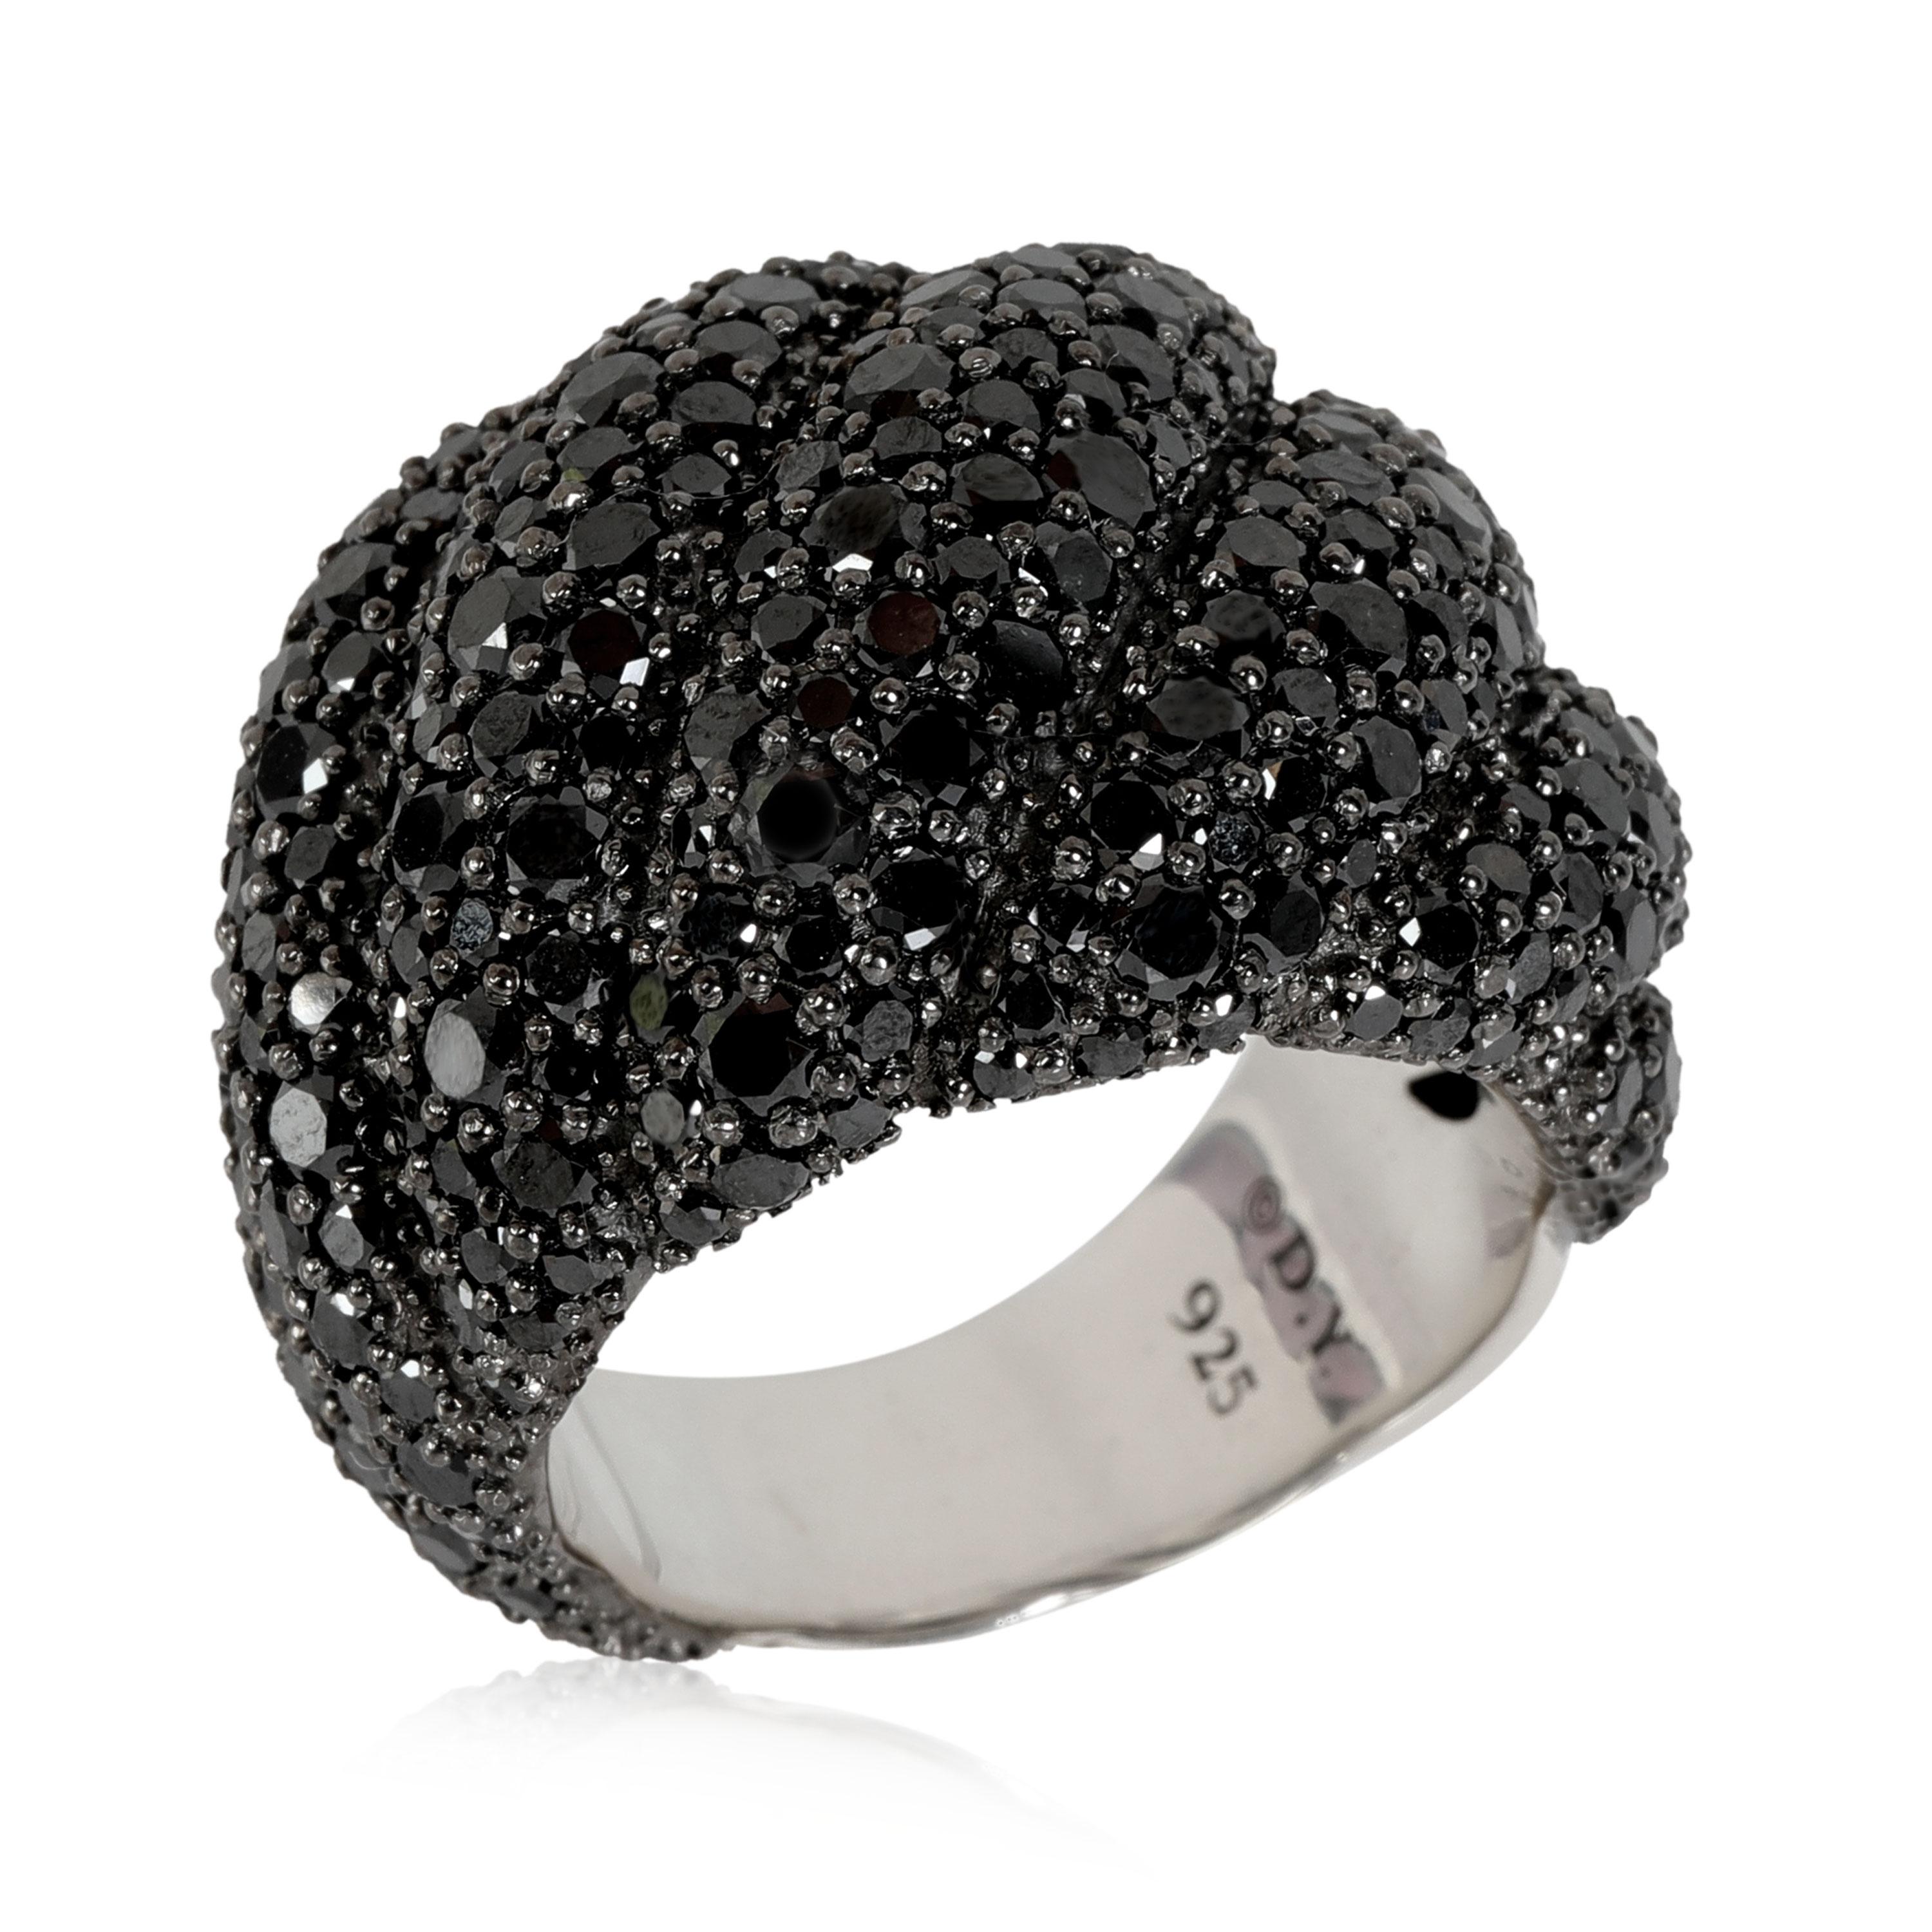 David Yurman Hampton Black Diamond Cable Ring in Sterling Silver 3.25 CTW

PRIMARY DETAILS
SKU: 113829
Listing Title: David Yurman Hampton Black Diamond Cable Ring in Sterling Silver 3.25 CTW
Condition Description: Retails for 2750 USD. In excellent